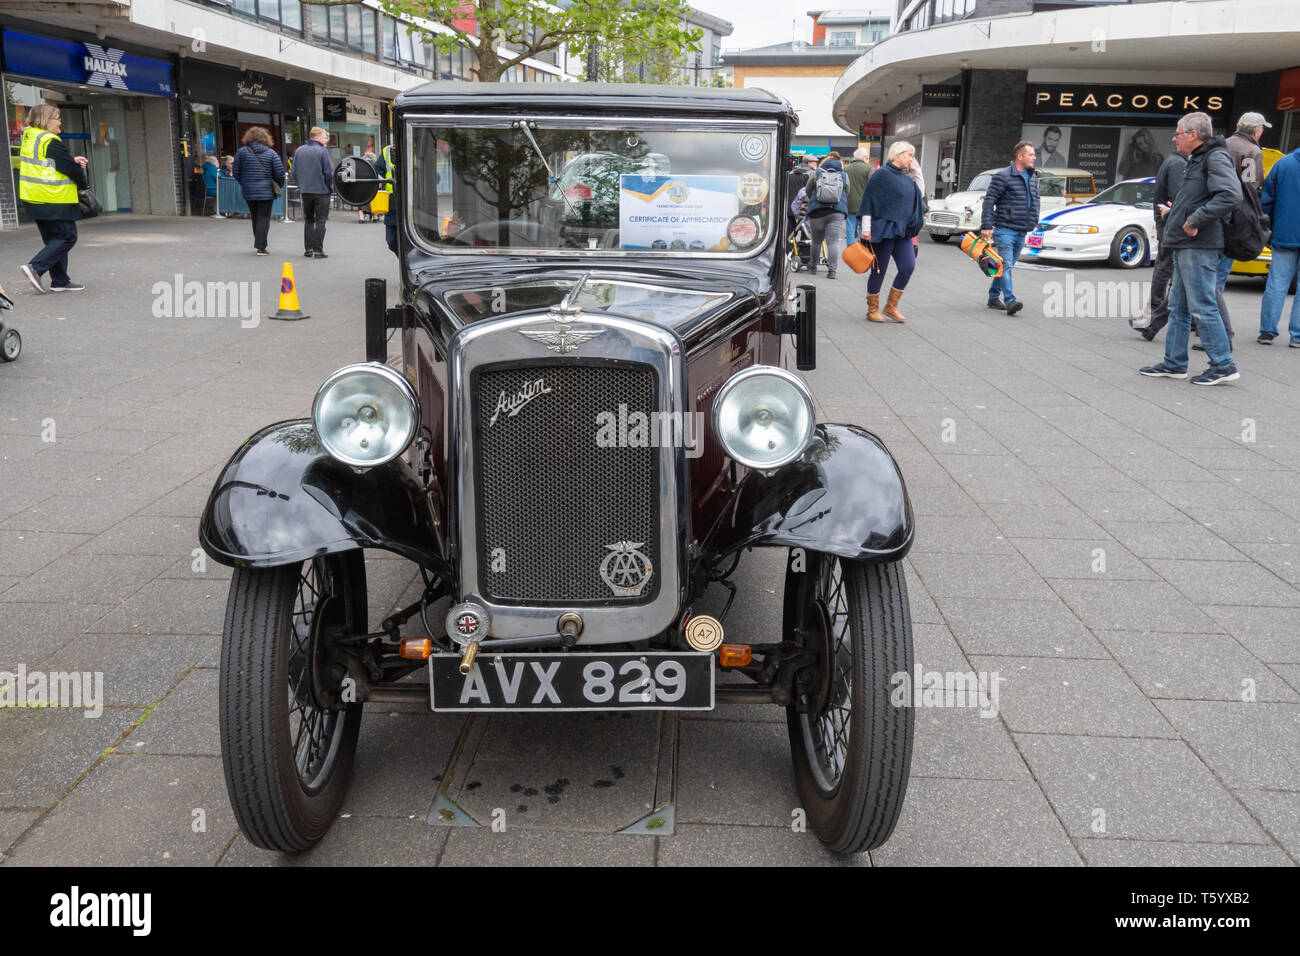 Maroon 1934 vintage Austin Seven RP Box 'Beatrix' car at a classic motor vehicle show in the UK Stock Photo